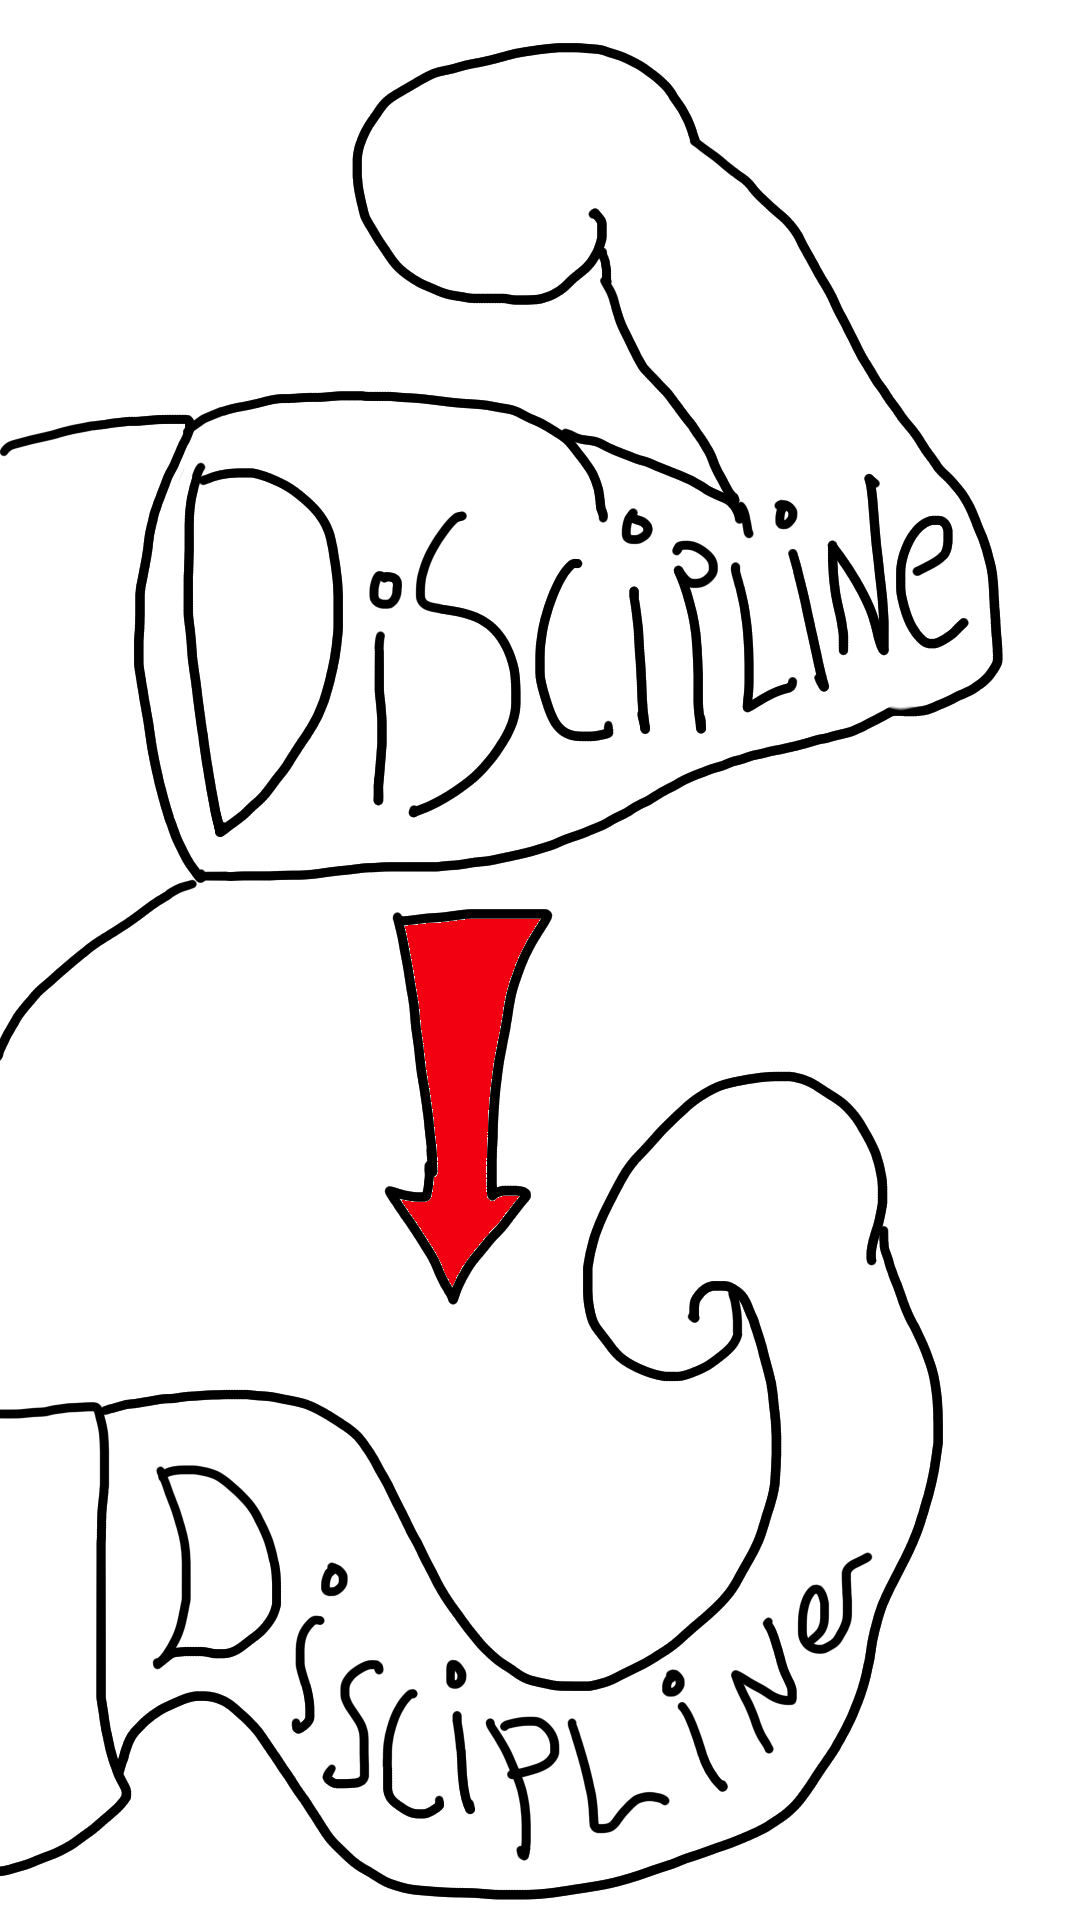 Discipline muscles deflating over time